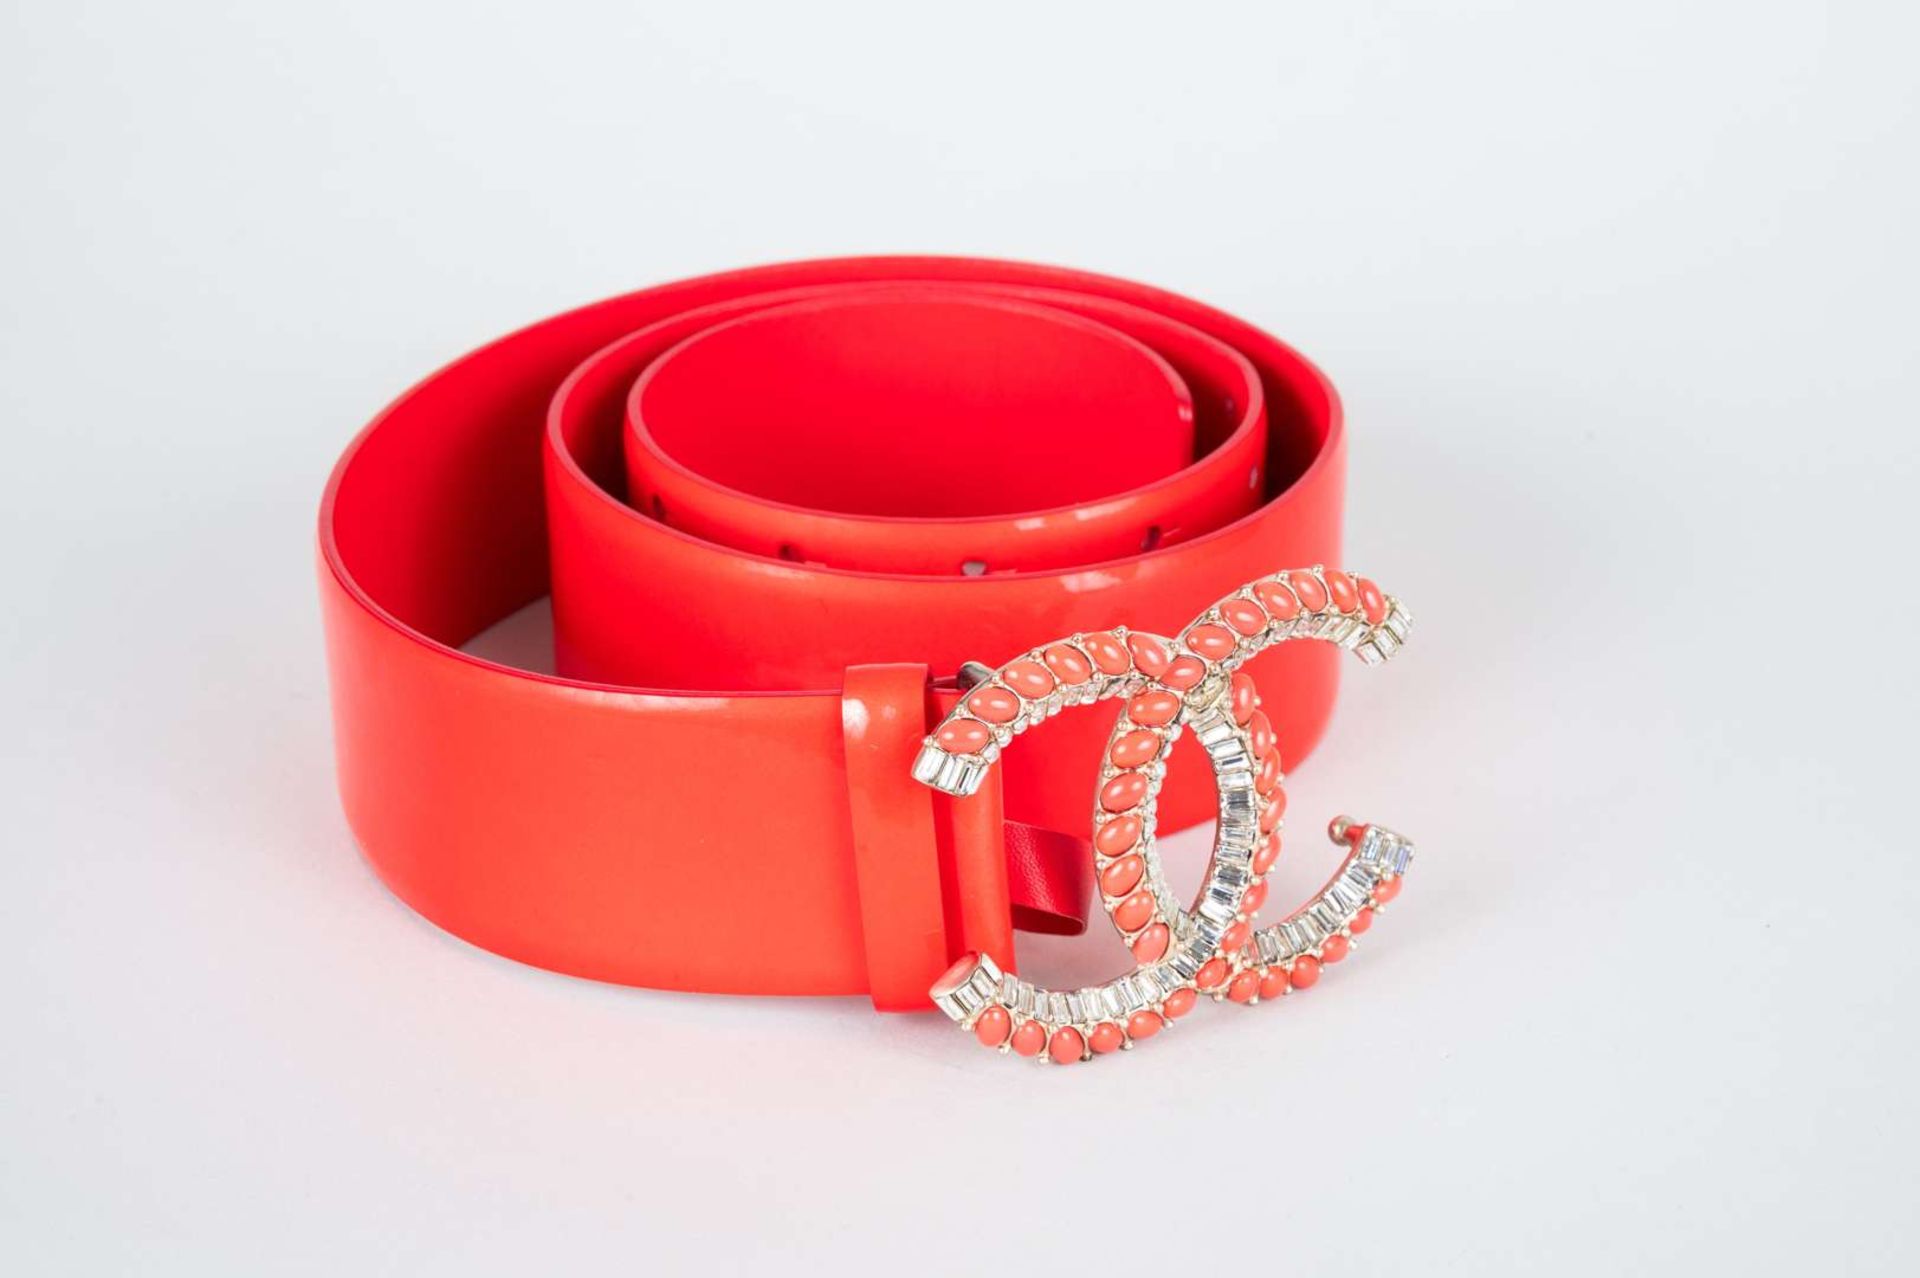 CHANEL, coral red, patent leather belt - Image 6 of 6